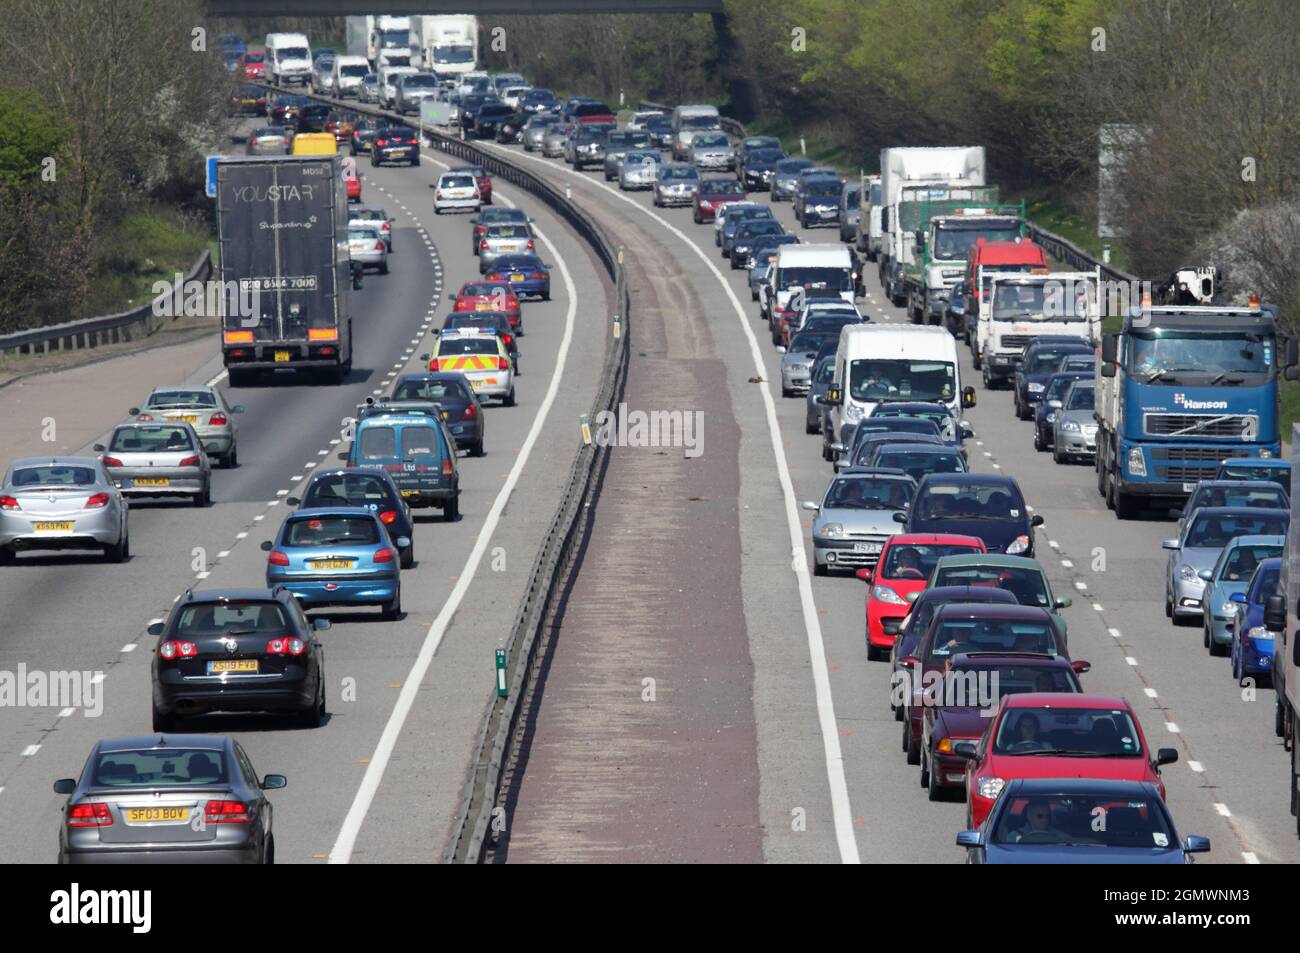 Oxford, England - 2010; Heavy traffic on the A34 highway just outside Oxford. The A34 is a major route from the ports on the South Coast of England to Stock Photo